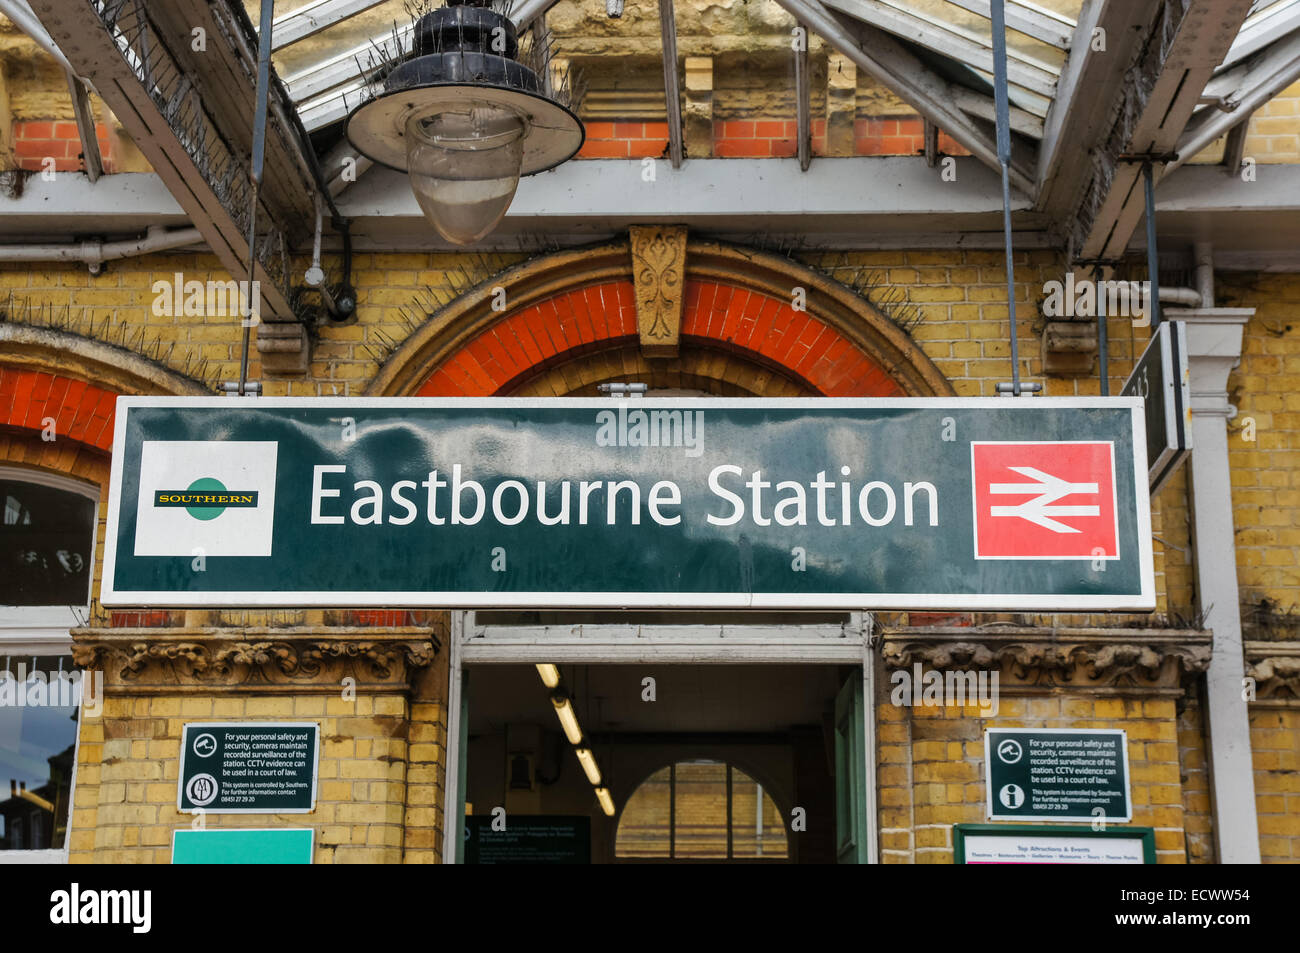 Railway train station in Eastbourne East Sussex England United Kingdom UK Stock Photo